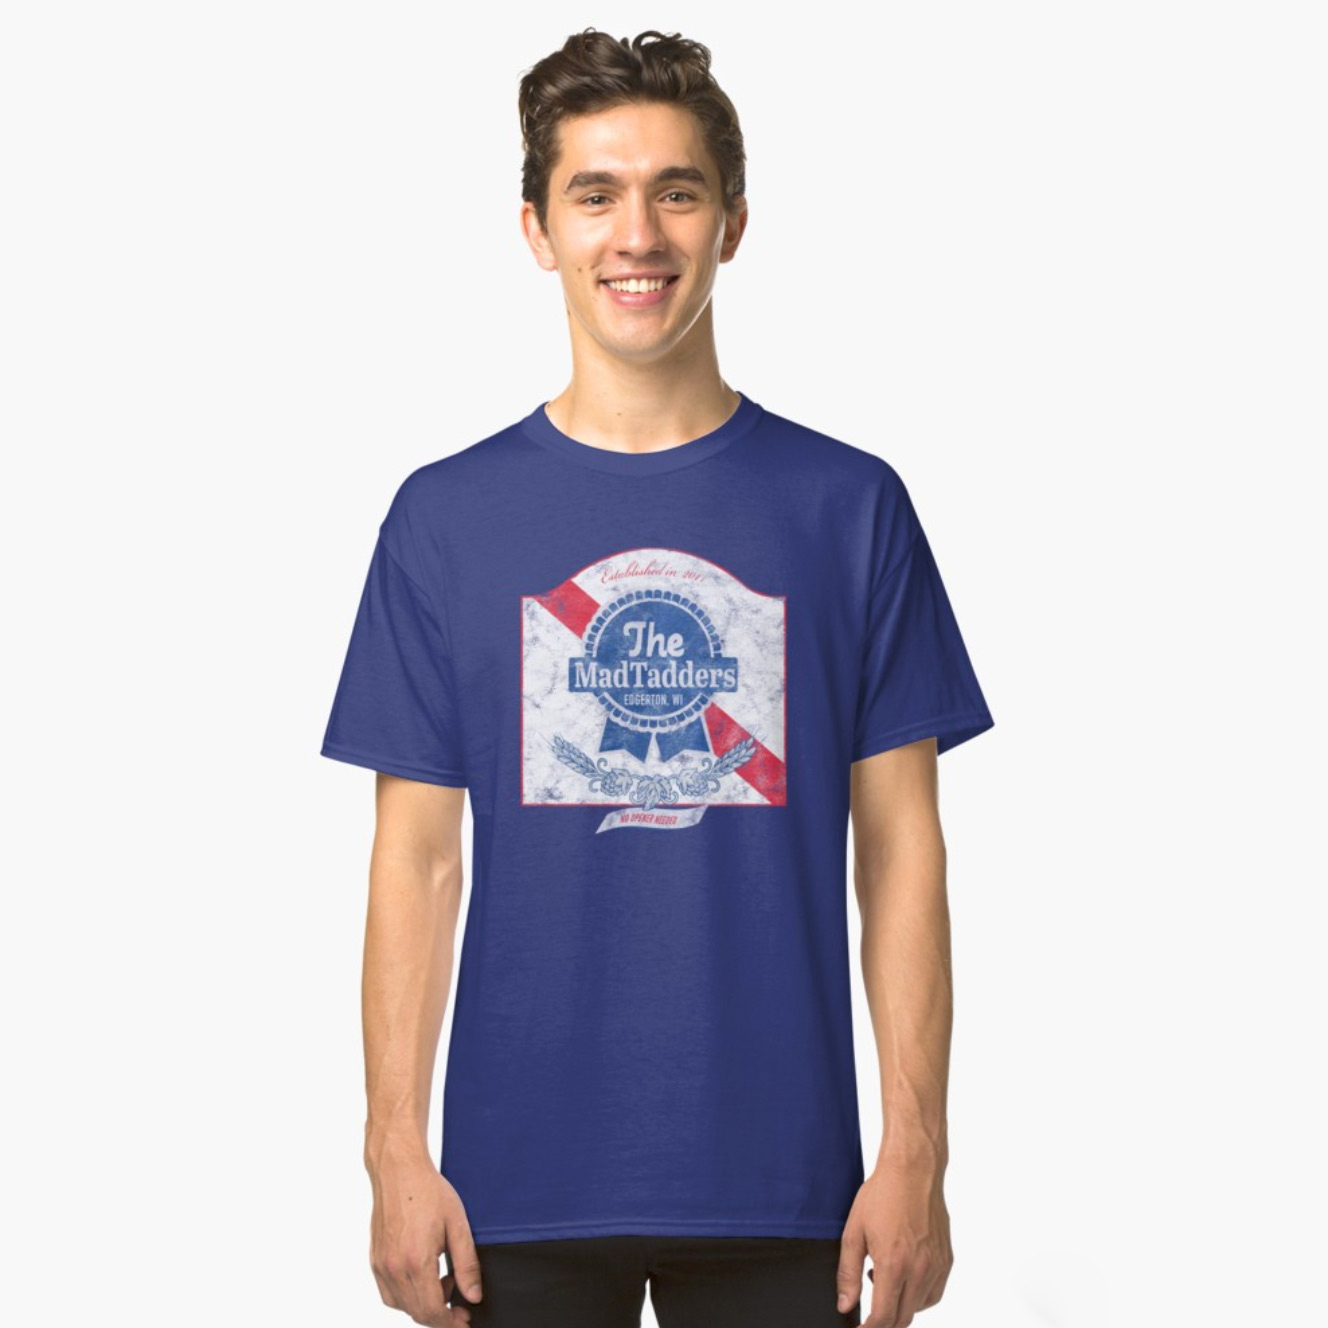 MadTadders Merchandise - Pabst Distressed Hipster Print